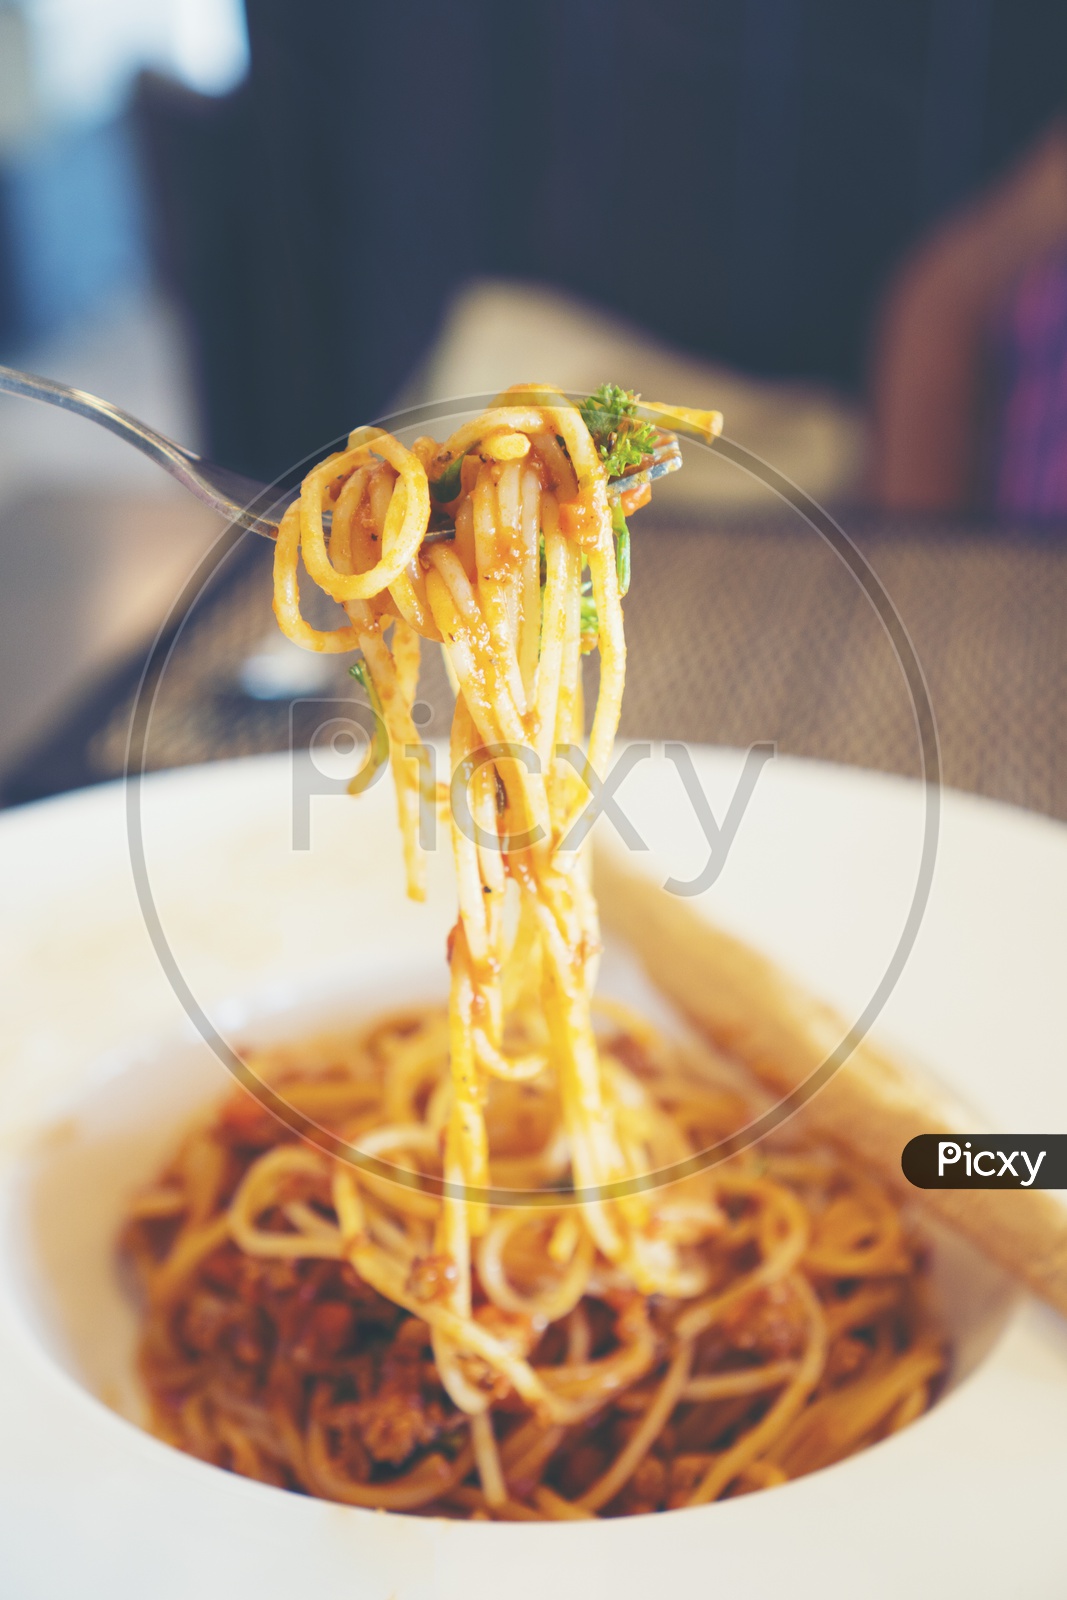 Spaghetti in white plate or Noodles In a Plate